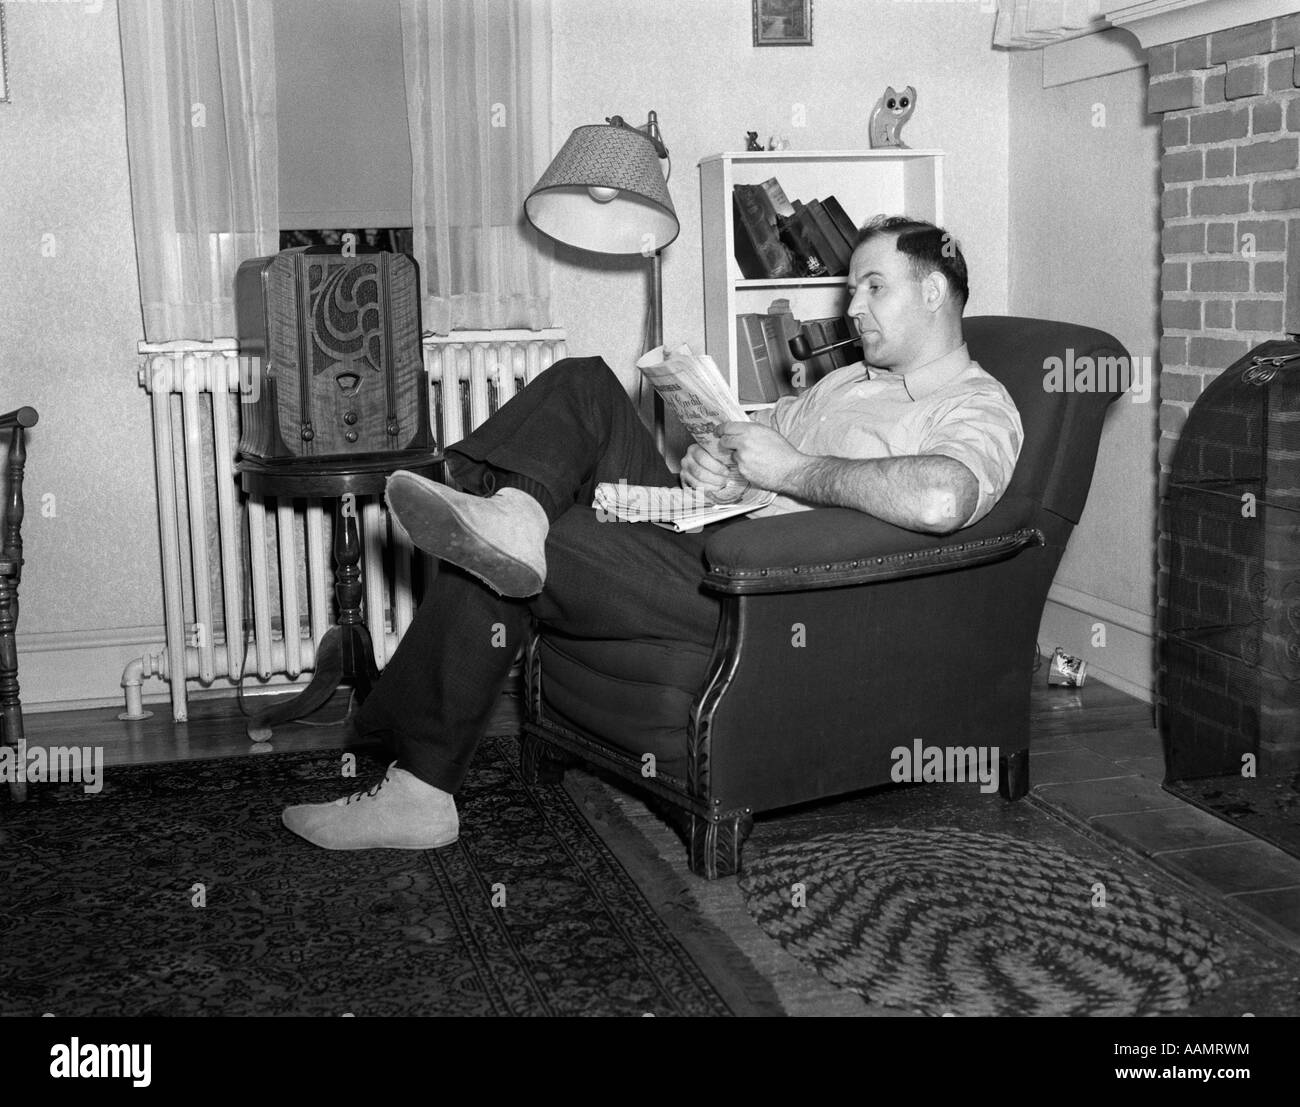 1950s MAN SITTING IN CHAIR IN LIVING ROOM SMOKING PIPE READING PAPER LISTENING TO RADIO Stock Photo